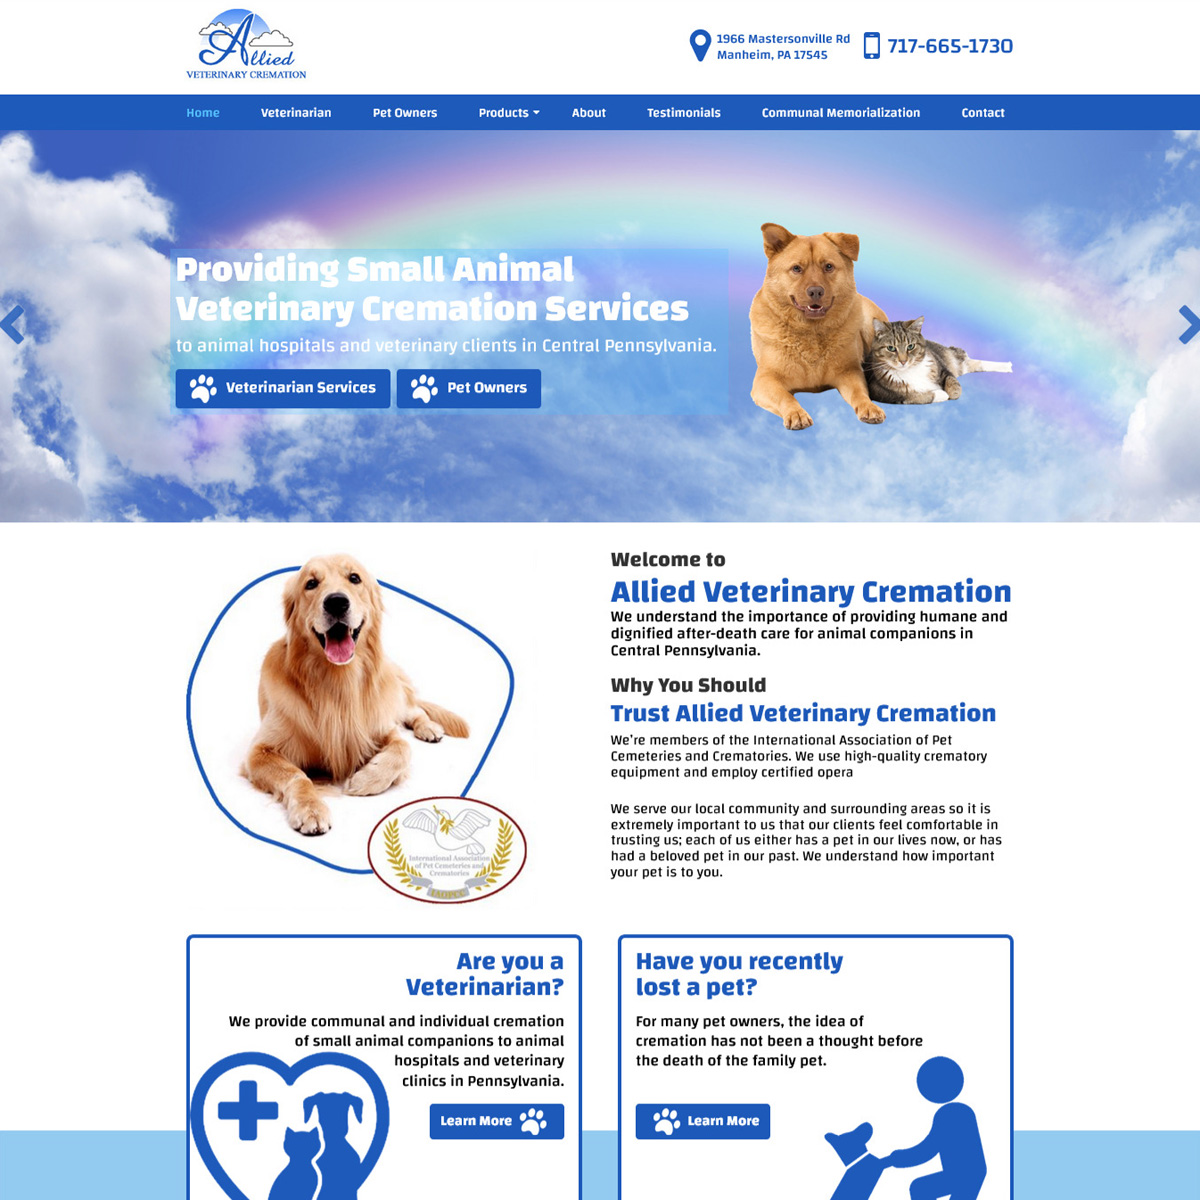 Allied Veterinary Cremation Services Website Design